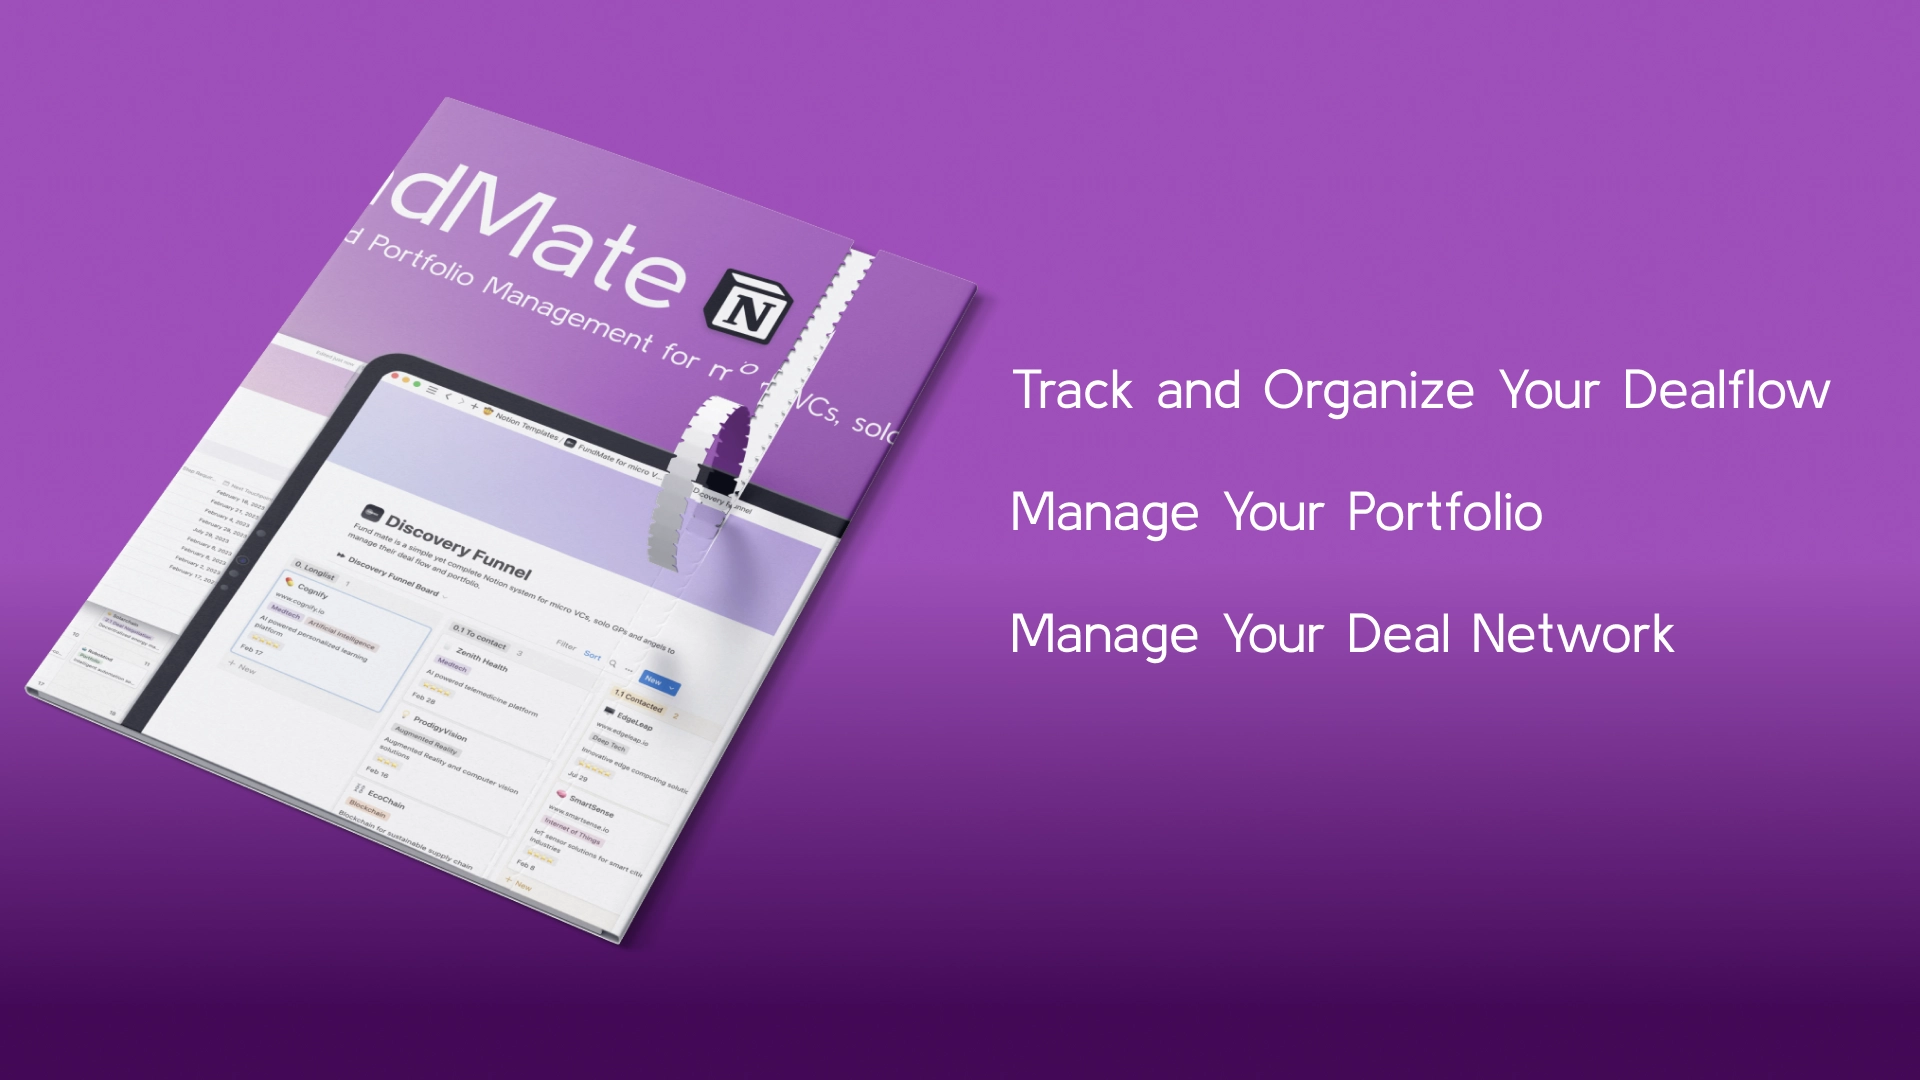 Notion Fundmate -  Crm For Micro Vcs, Solo Gps And Angels